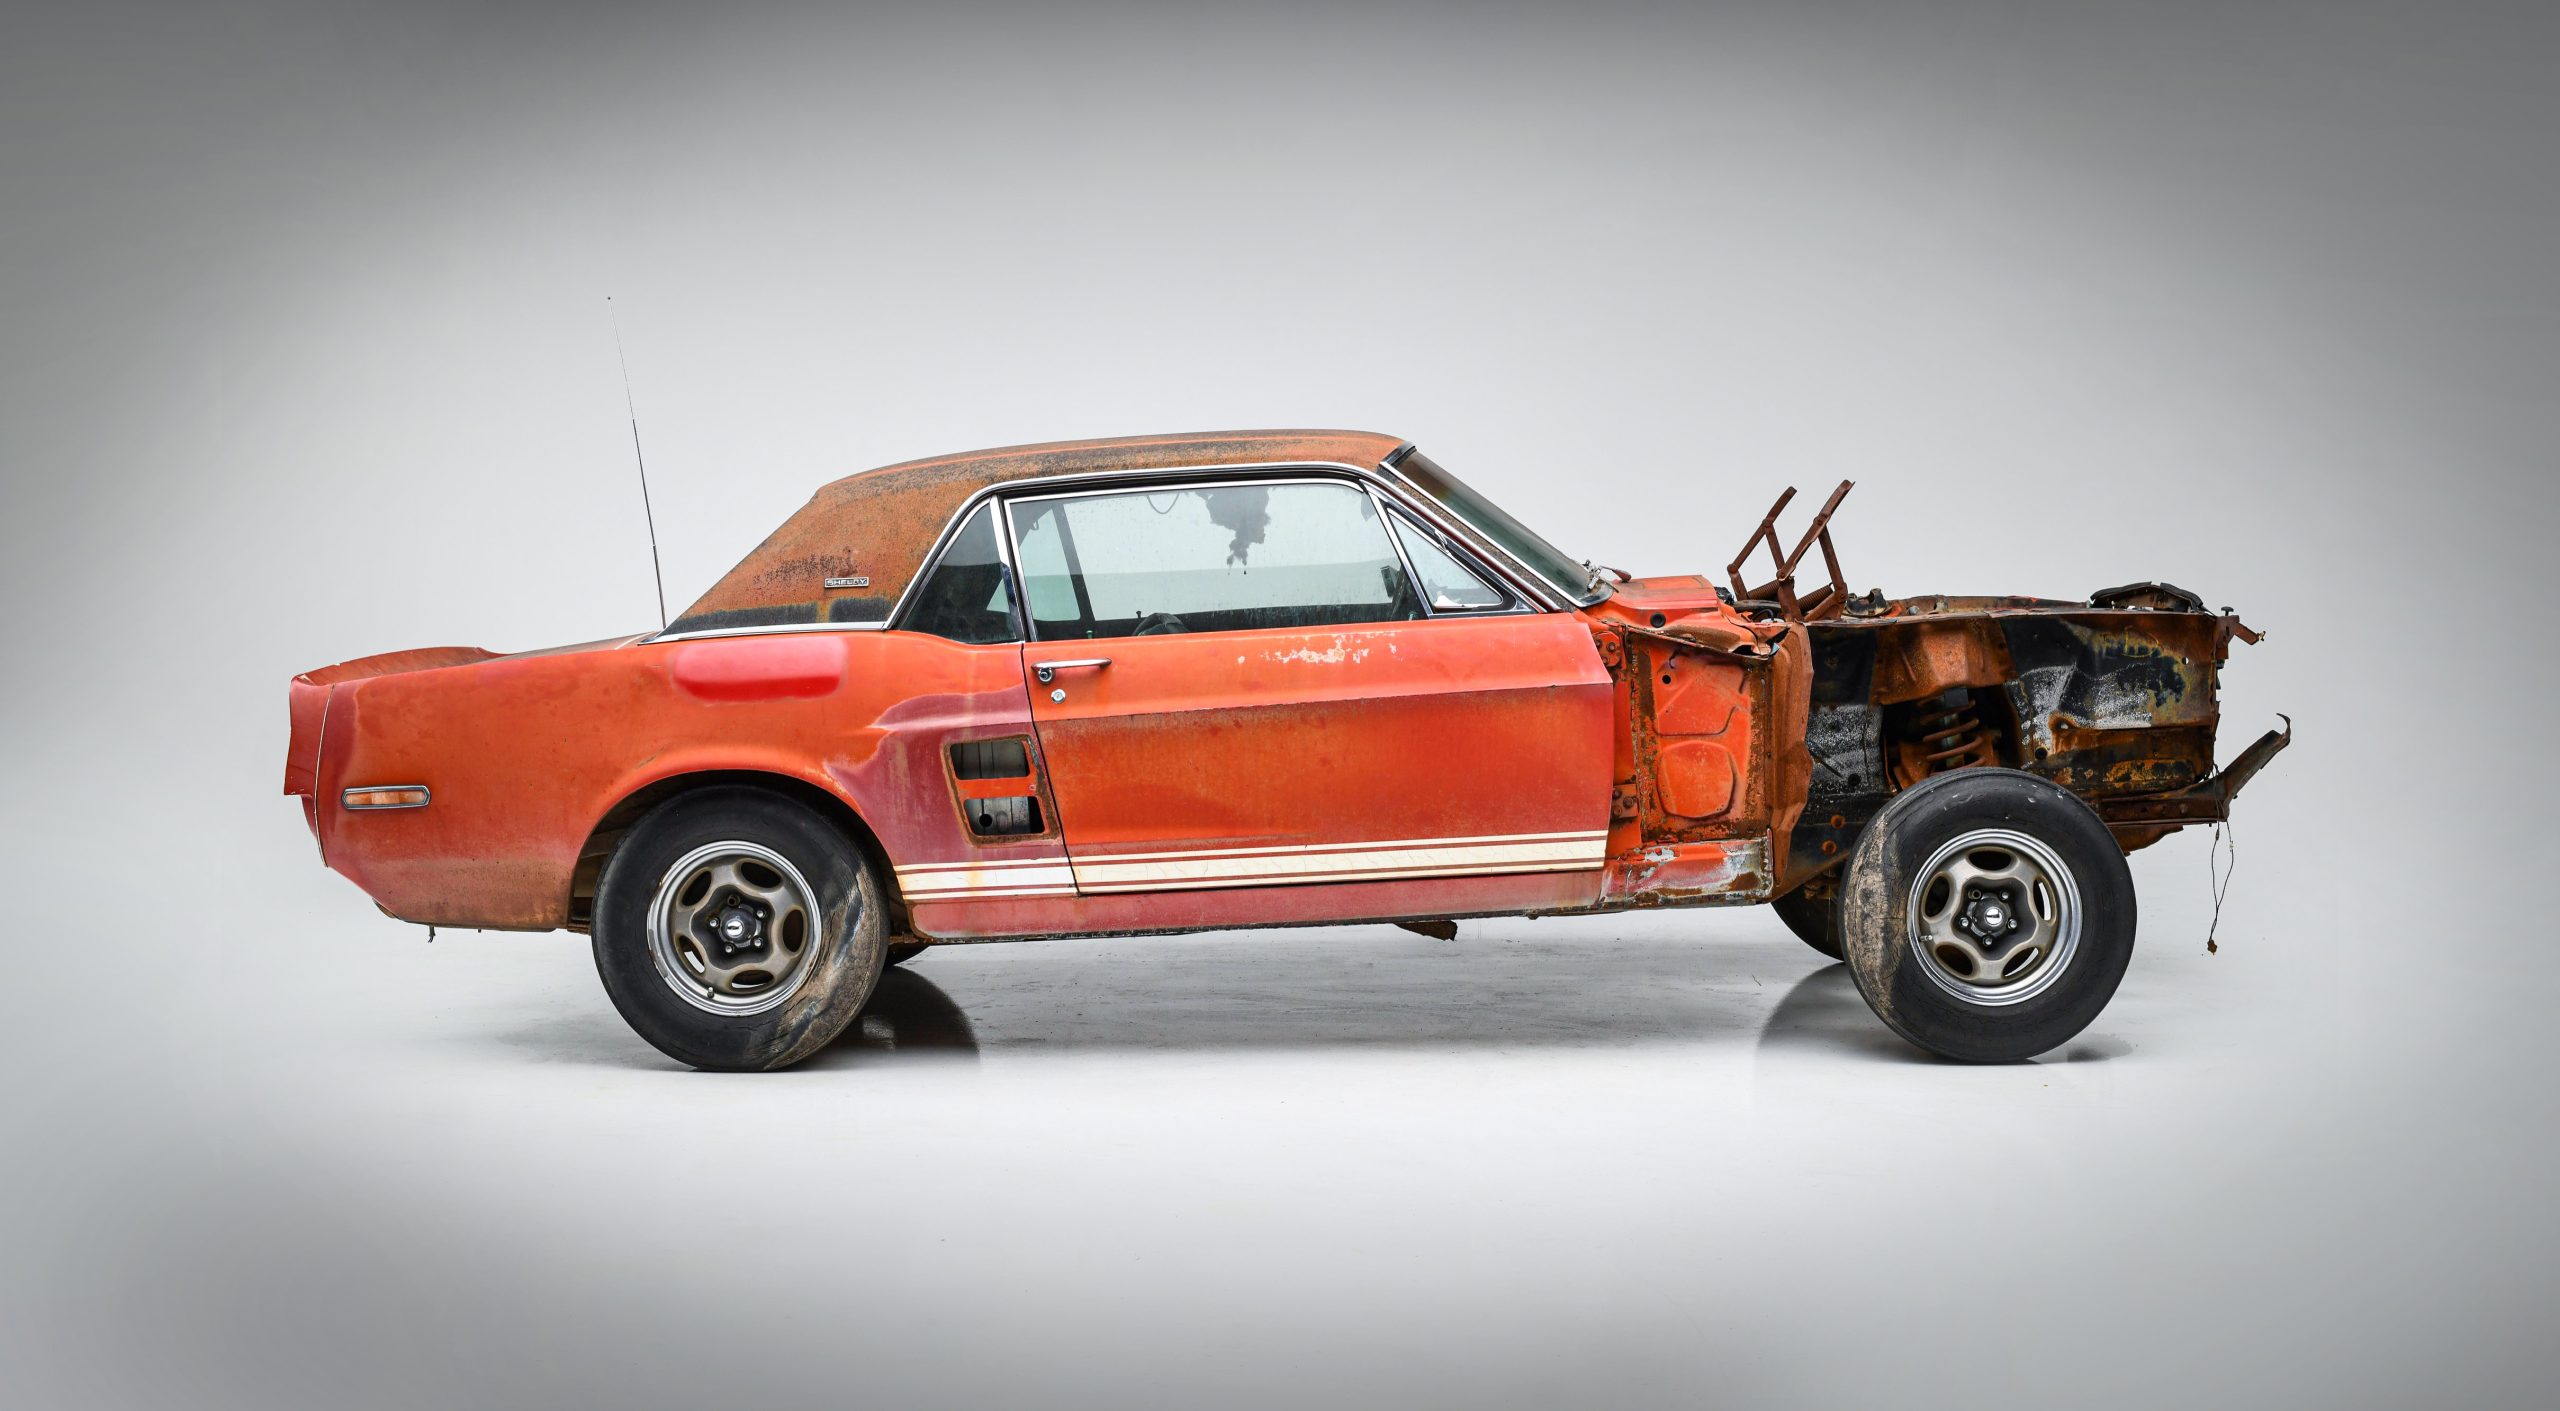 Little Red 1967 Shelby GT500 prototype Side Profile after recovery in field